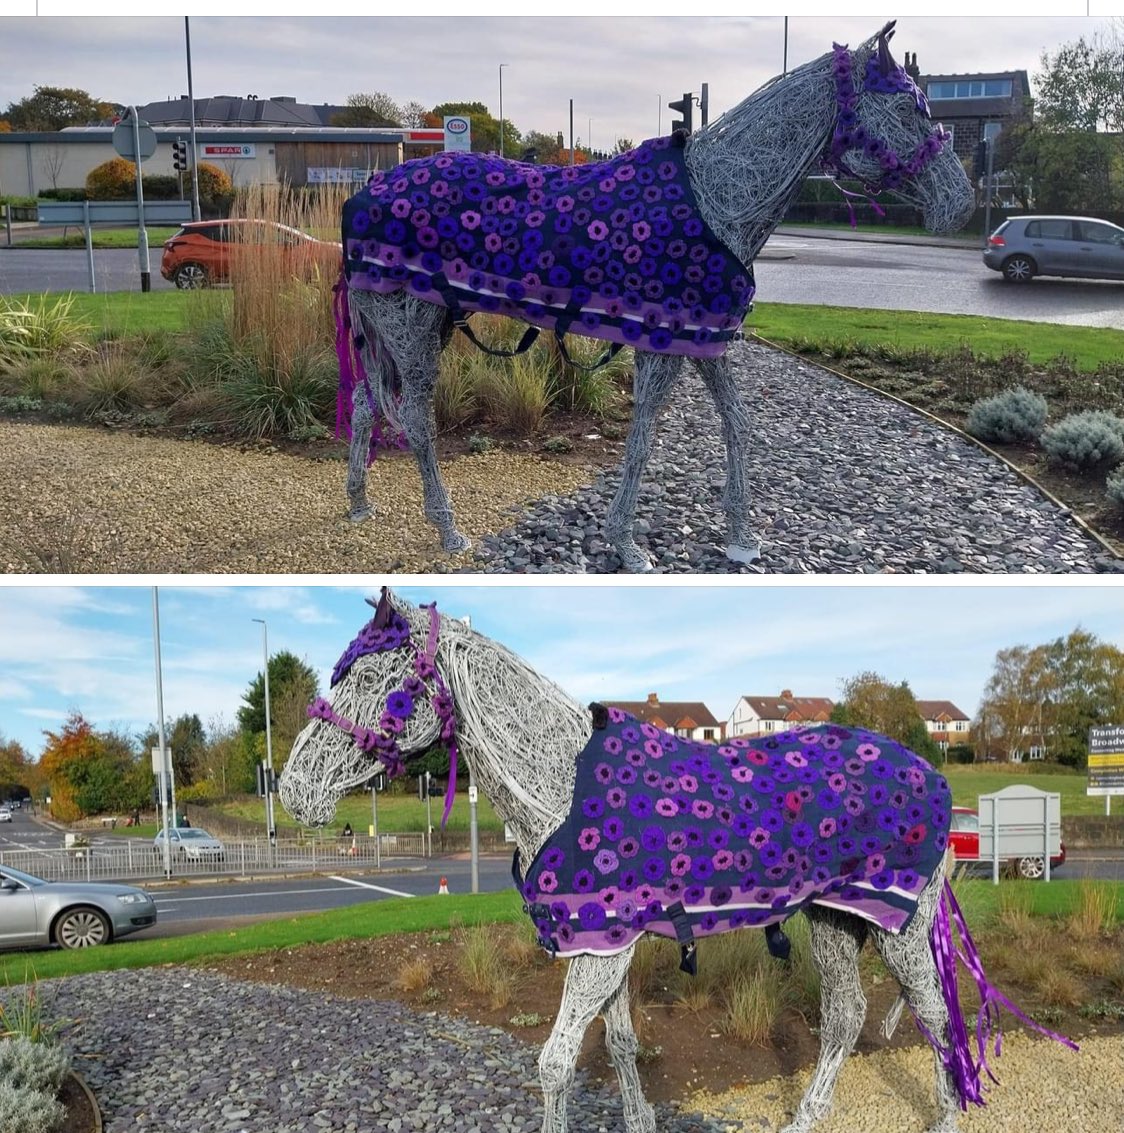 If you’re close to Horsforth, West Yorkshire you can see we’ve decorated the Horsforth Horse again this year with thanks to Adam. #Theyalsoserved #MAPPC